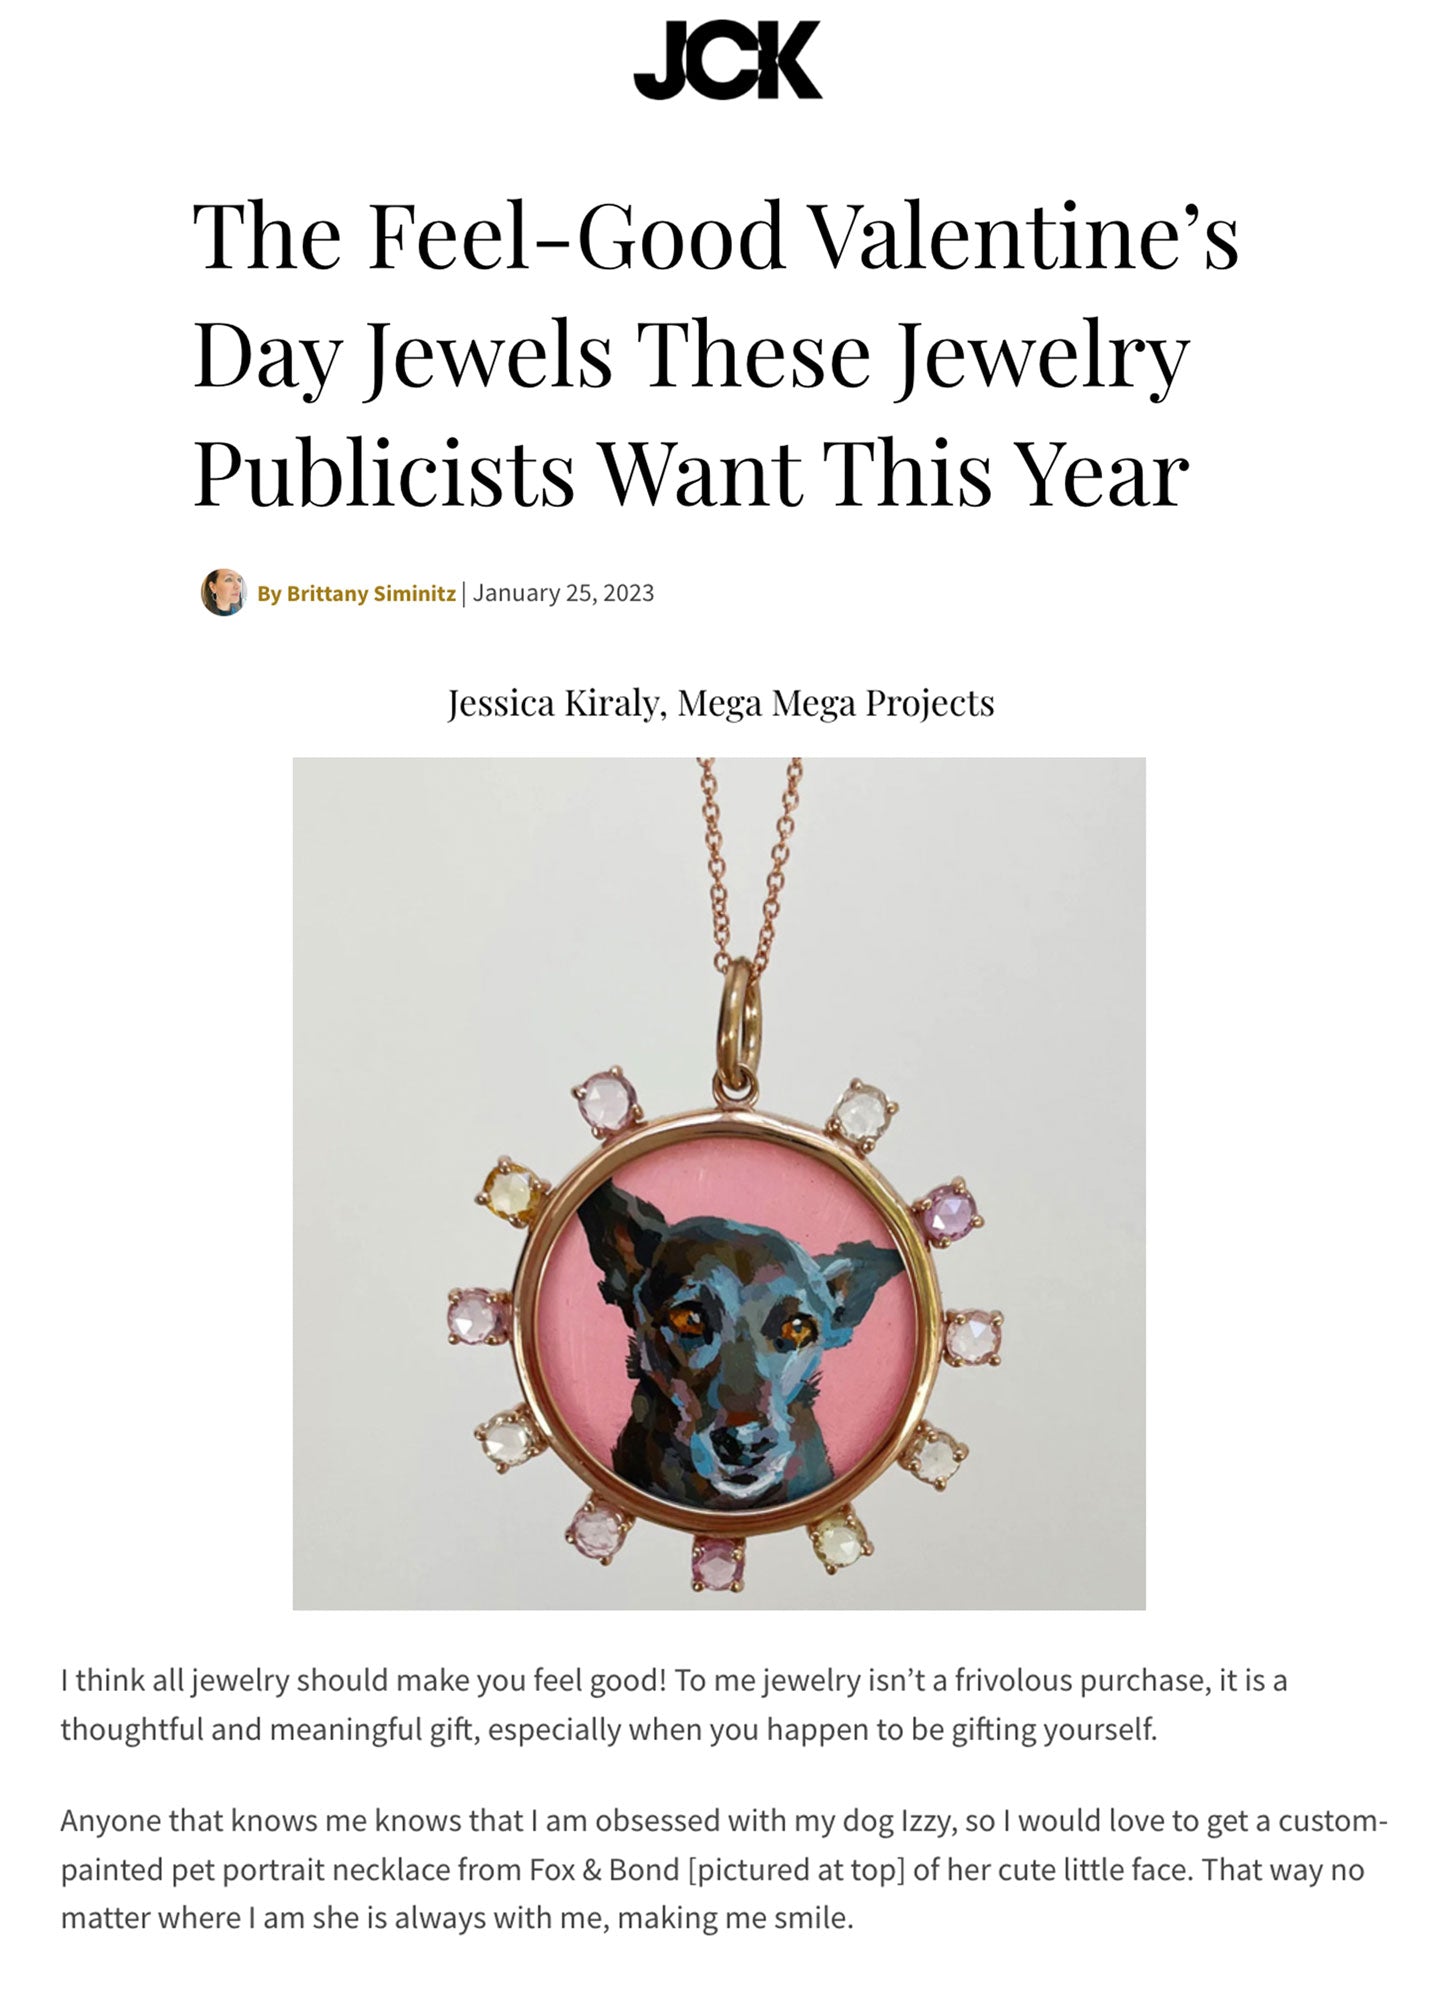 JCK: The Feel-Good Valentine’s Day Jewels These Jewelry Publicists Want This Year